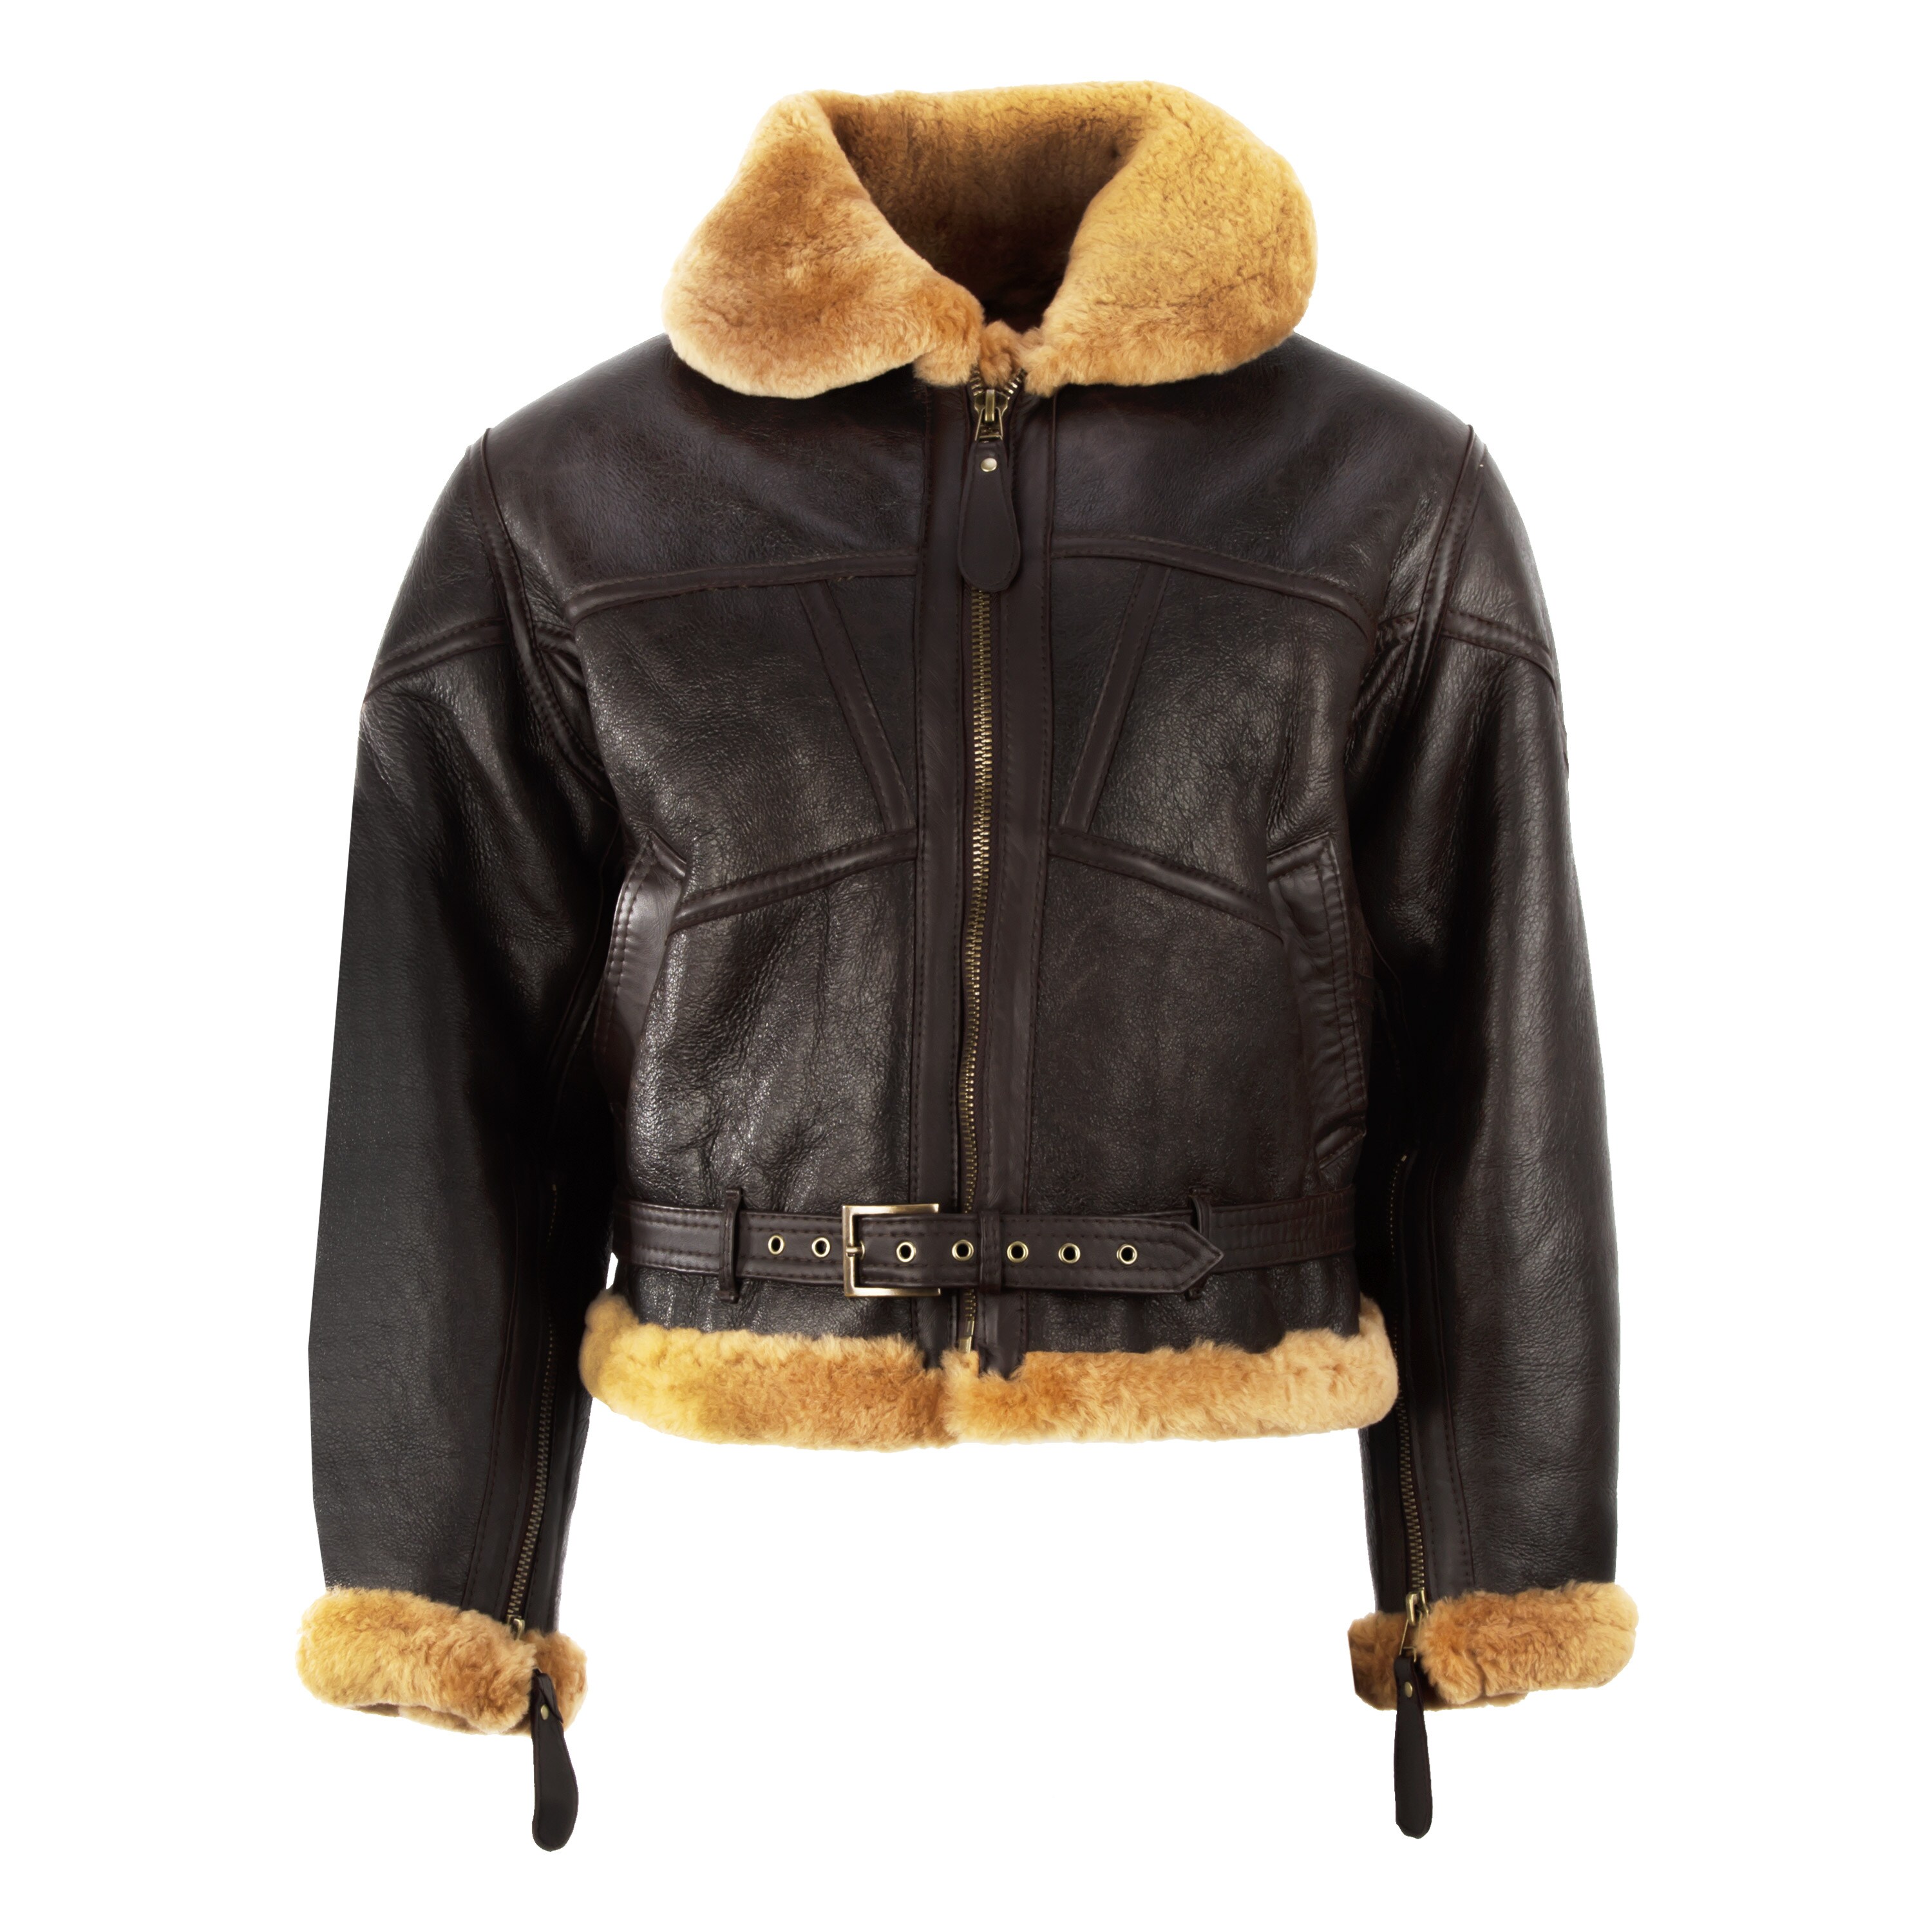 Purchase the Pilot Jacket RAF Sheep Skin by ASMC